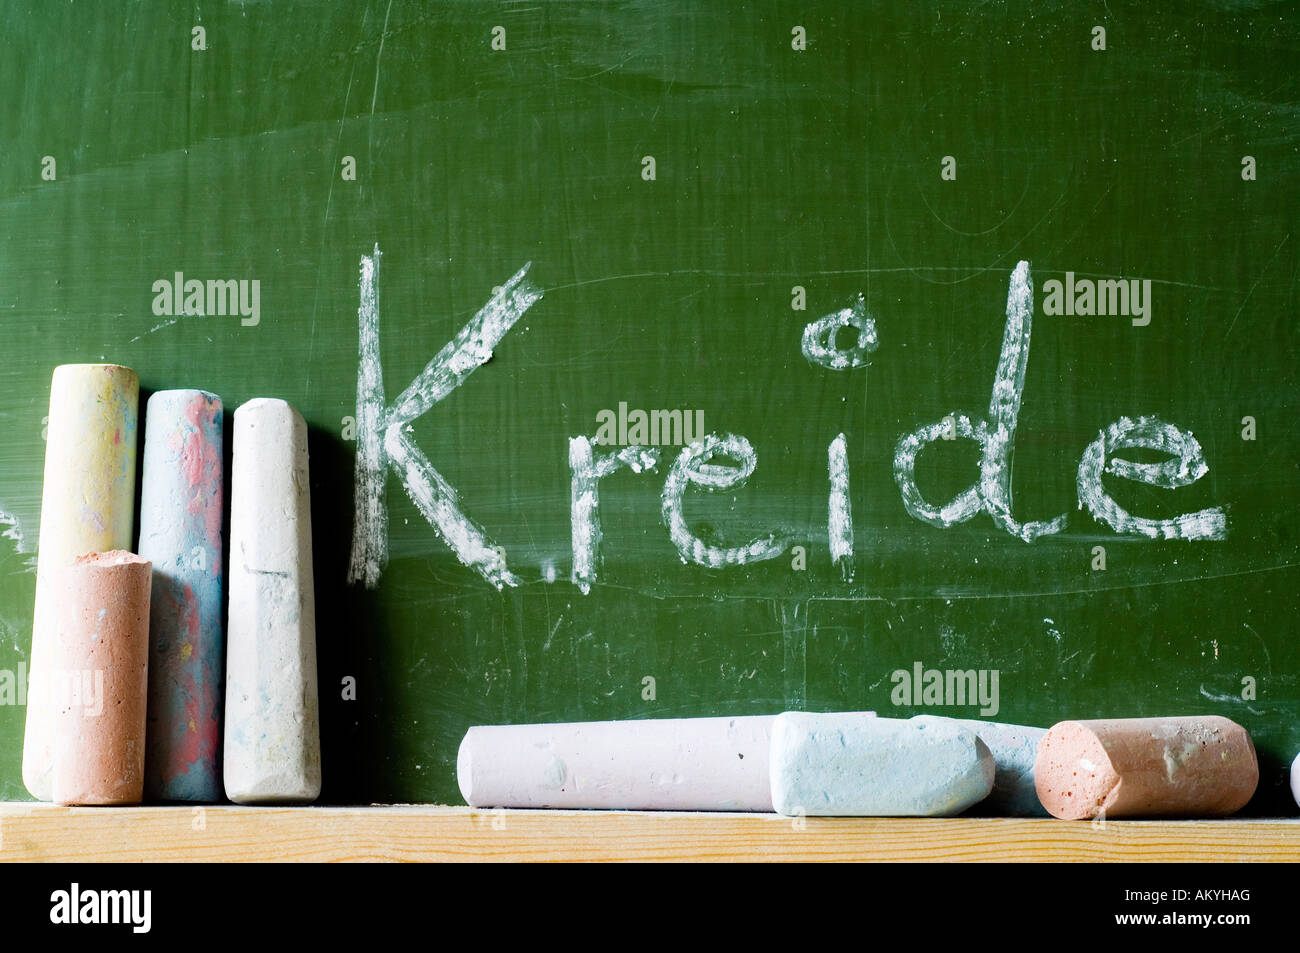 The word chalk is written on a chalkboard. In the foreground some pieces of coloured chalk. Stock Photo